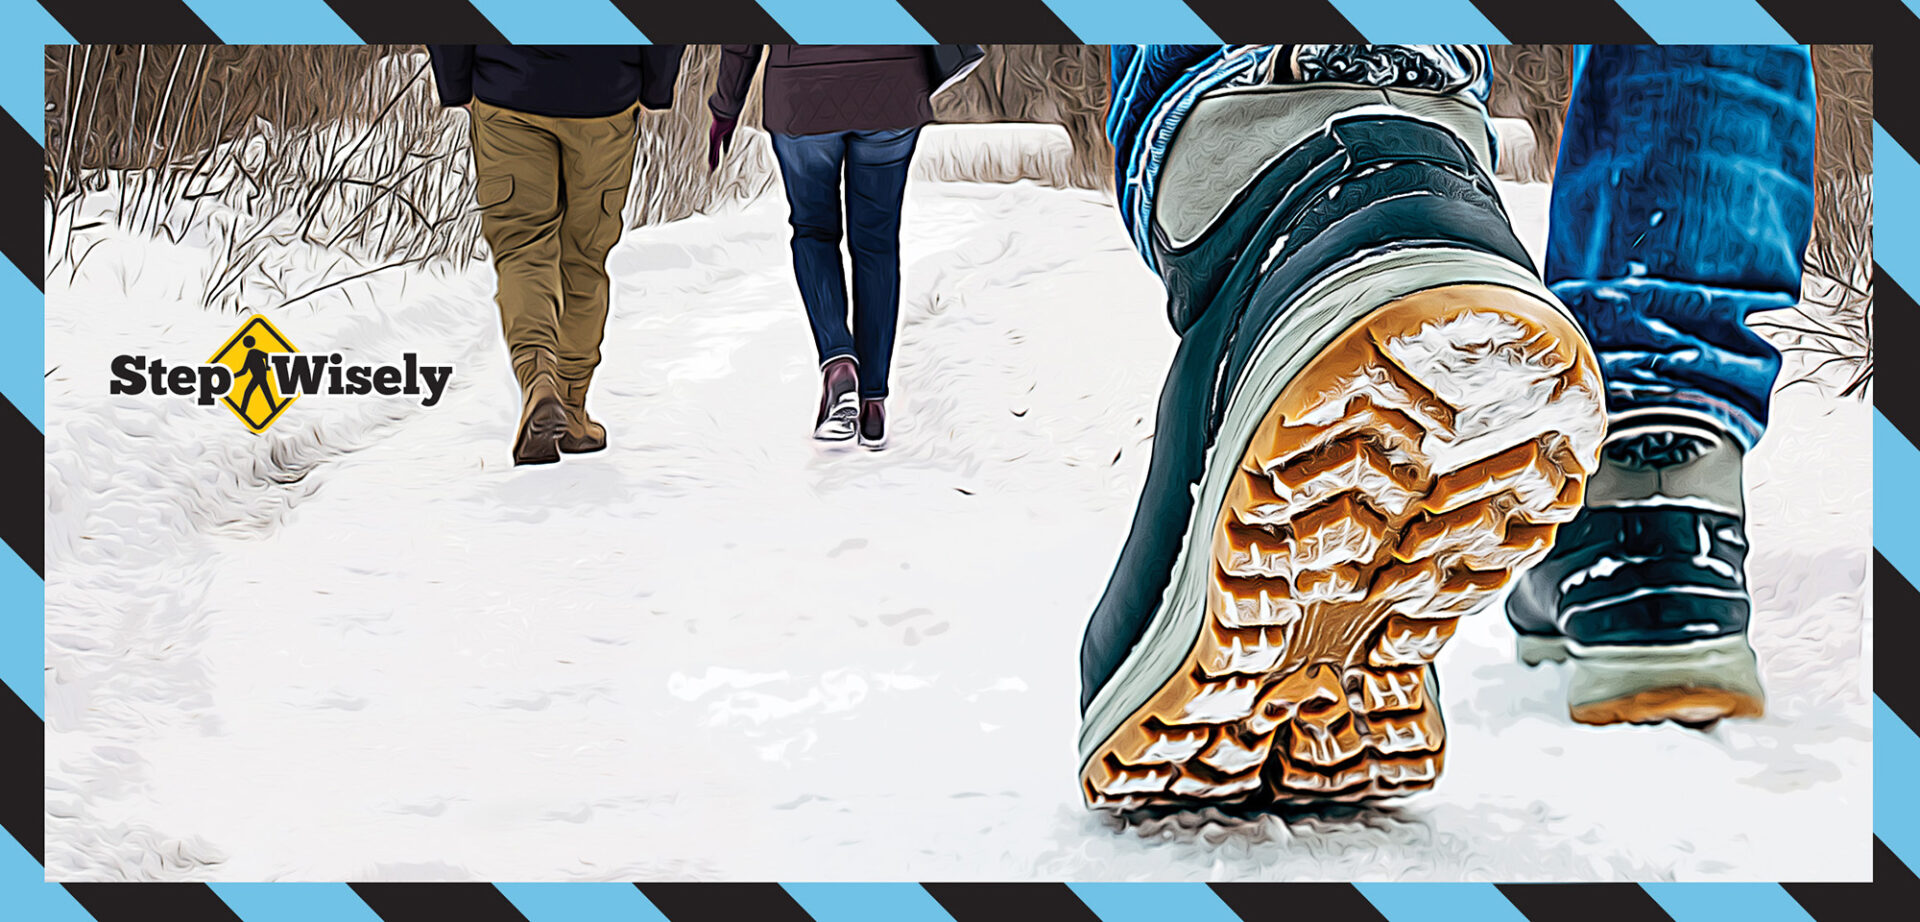 People walking on snow-covered path, wearing deep tread boots. Step Wisely logo in left corner.